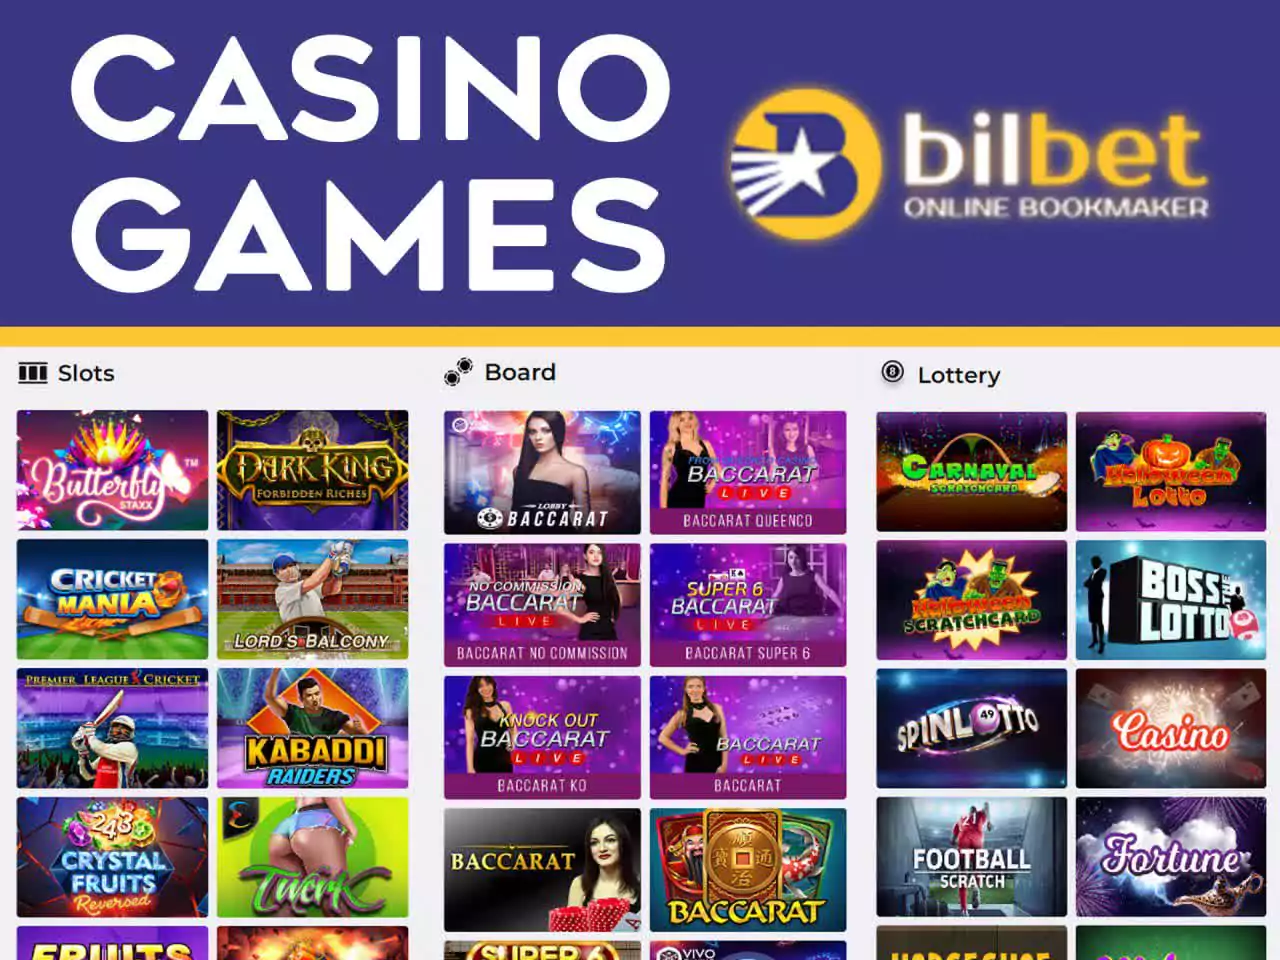 Play slots, roulette, poker and other casino games in the app.